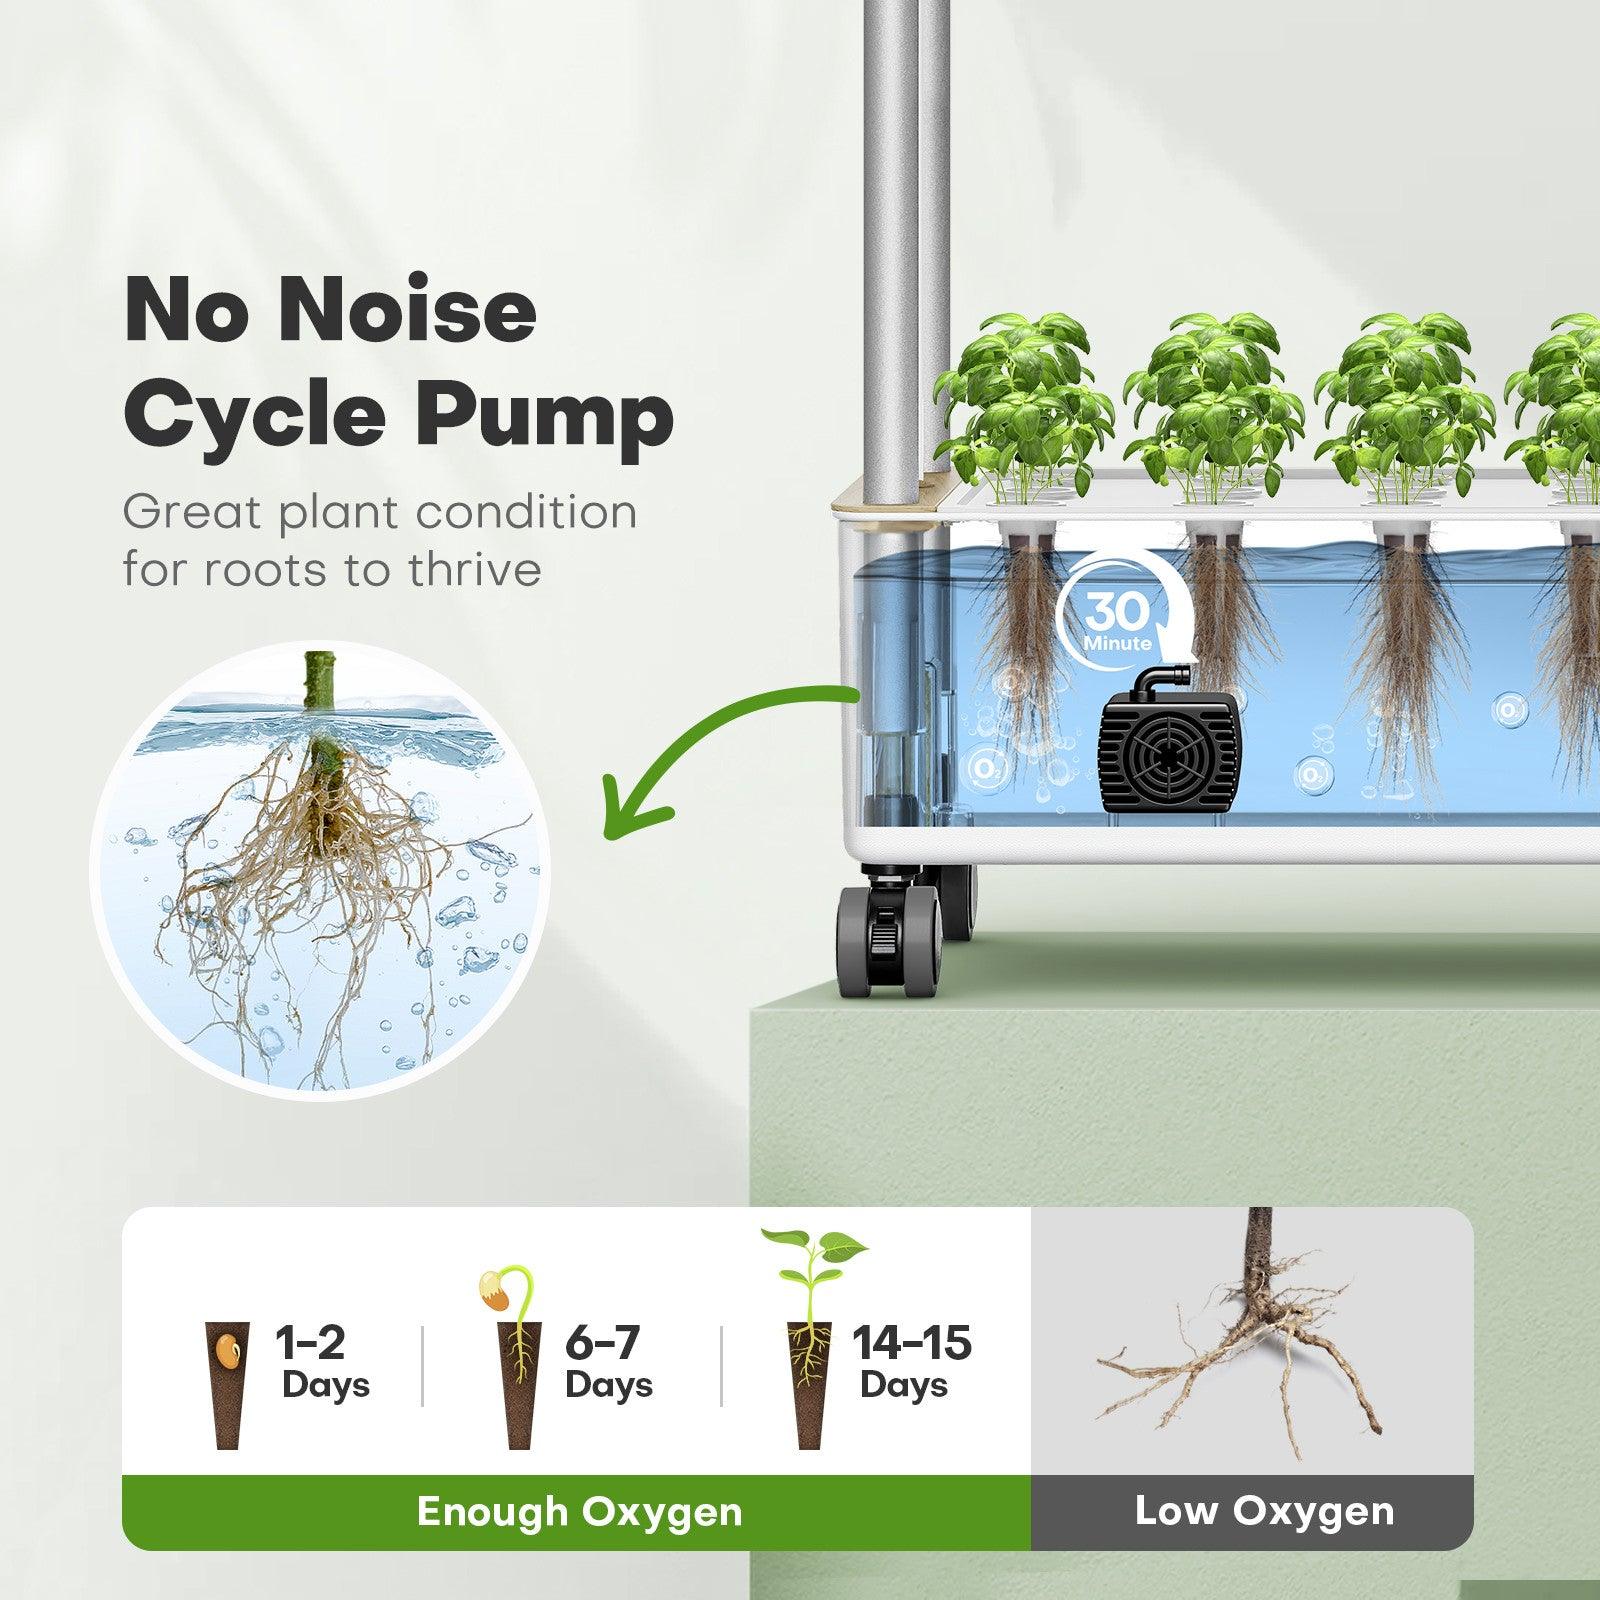 Silent Circulating Water Pump provides enough oxygen for the Vertical Hydroponic Garden